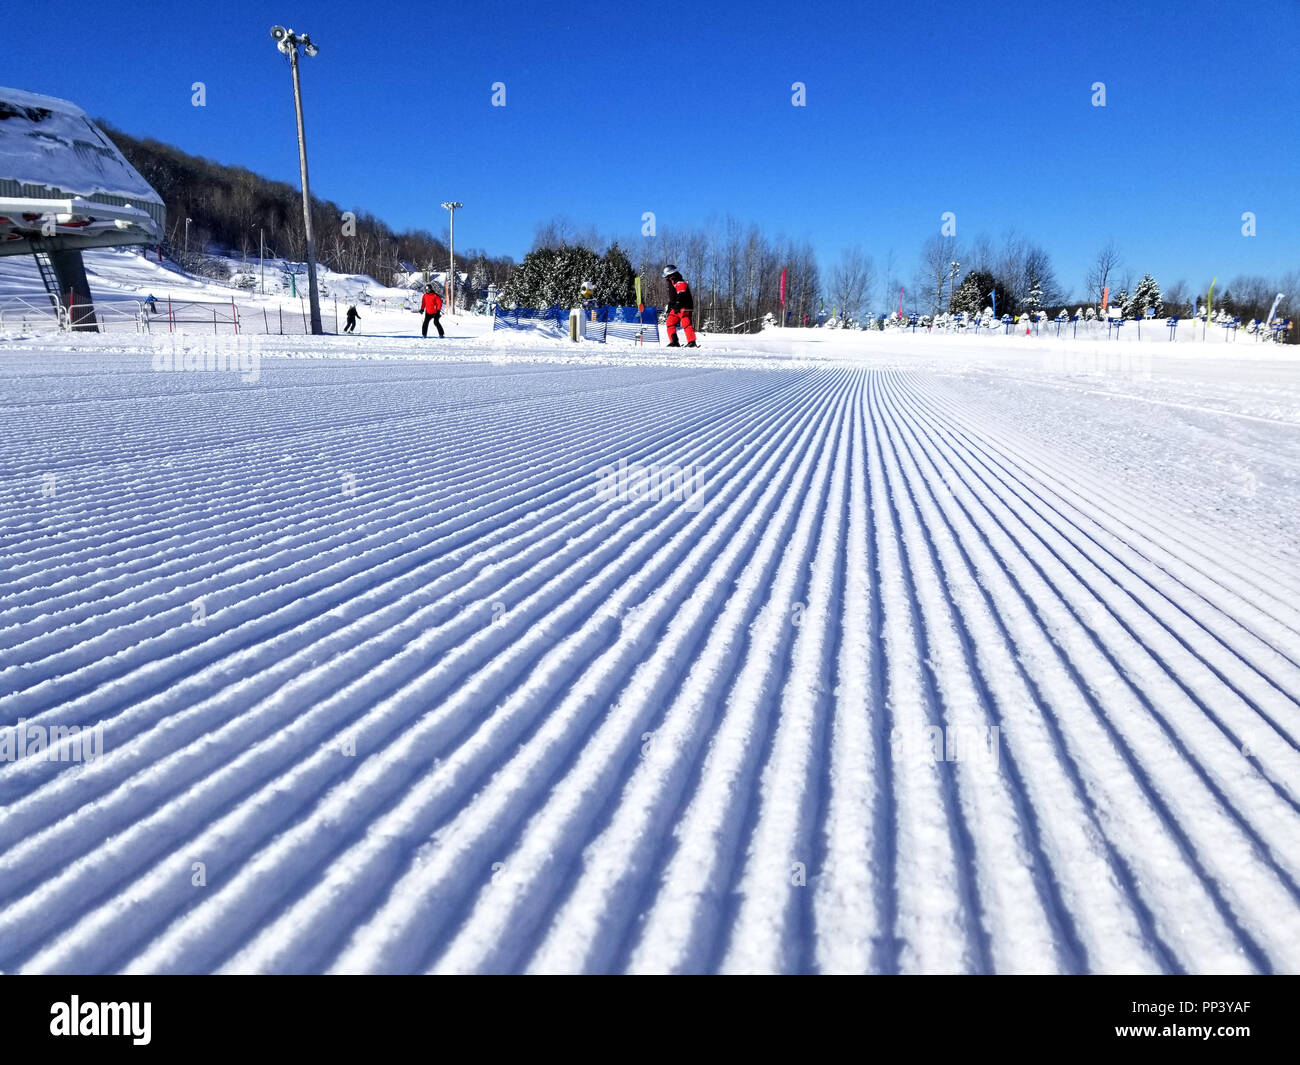 Groomed snow of alpine skiing trails at Saint-Sauveur, Quebec Stock Photo